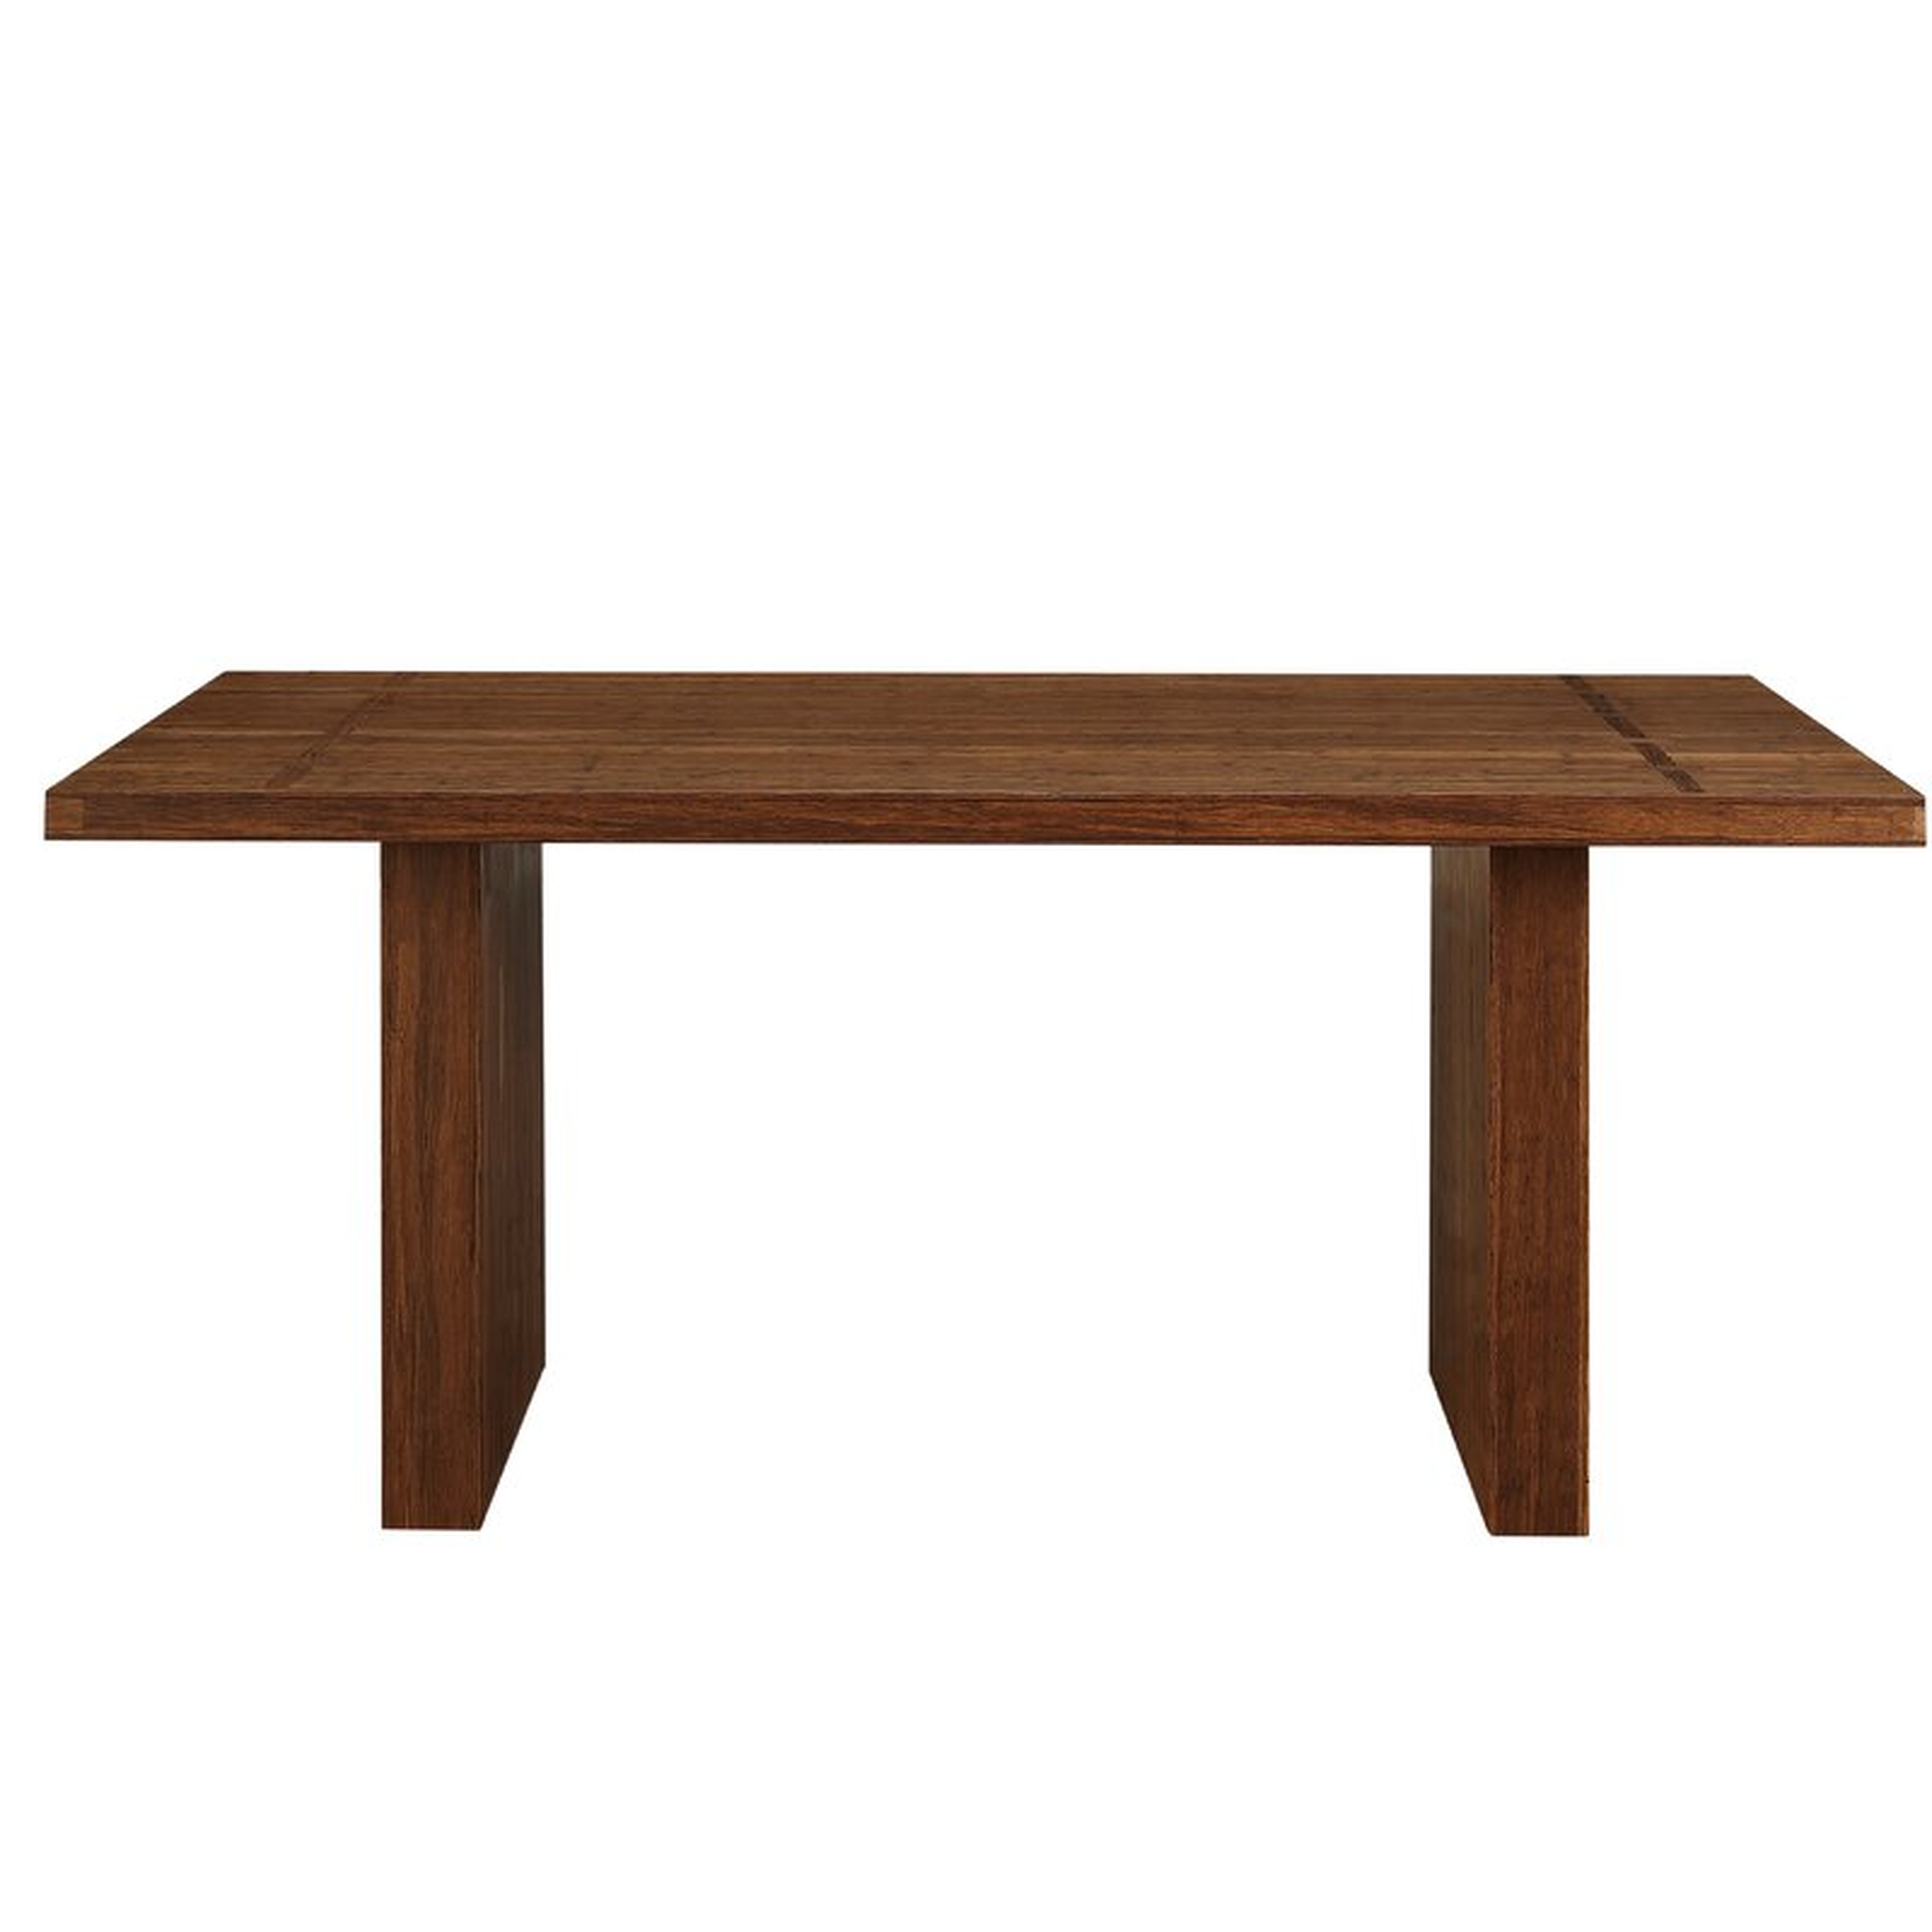  Sequoia Solid Wood Dining Table Size: 30" H x 72" L x 36" W - Perigold